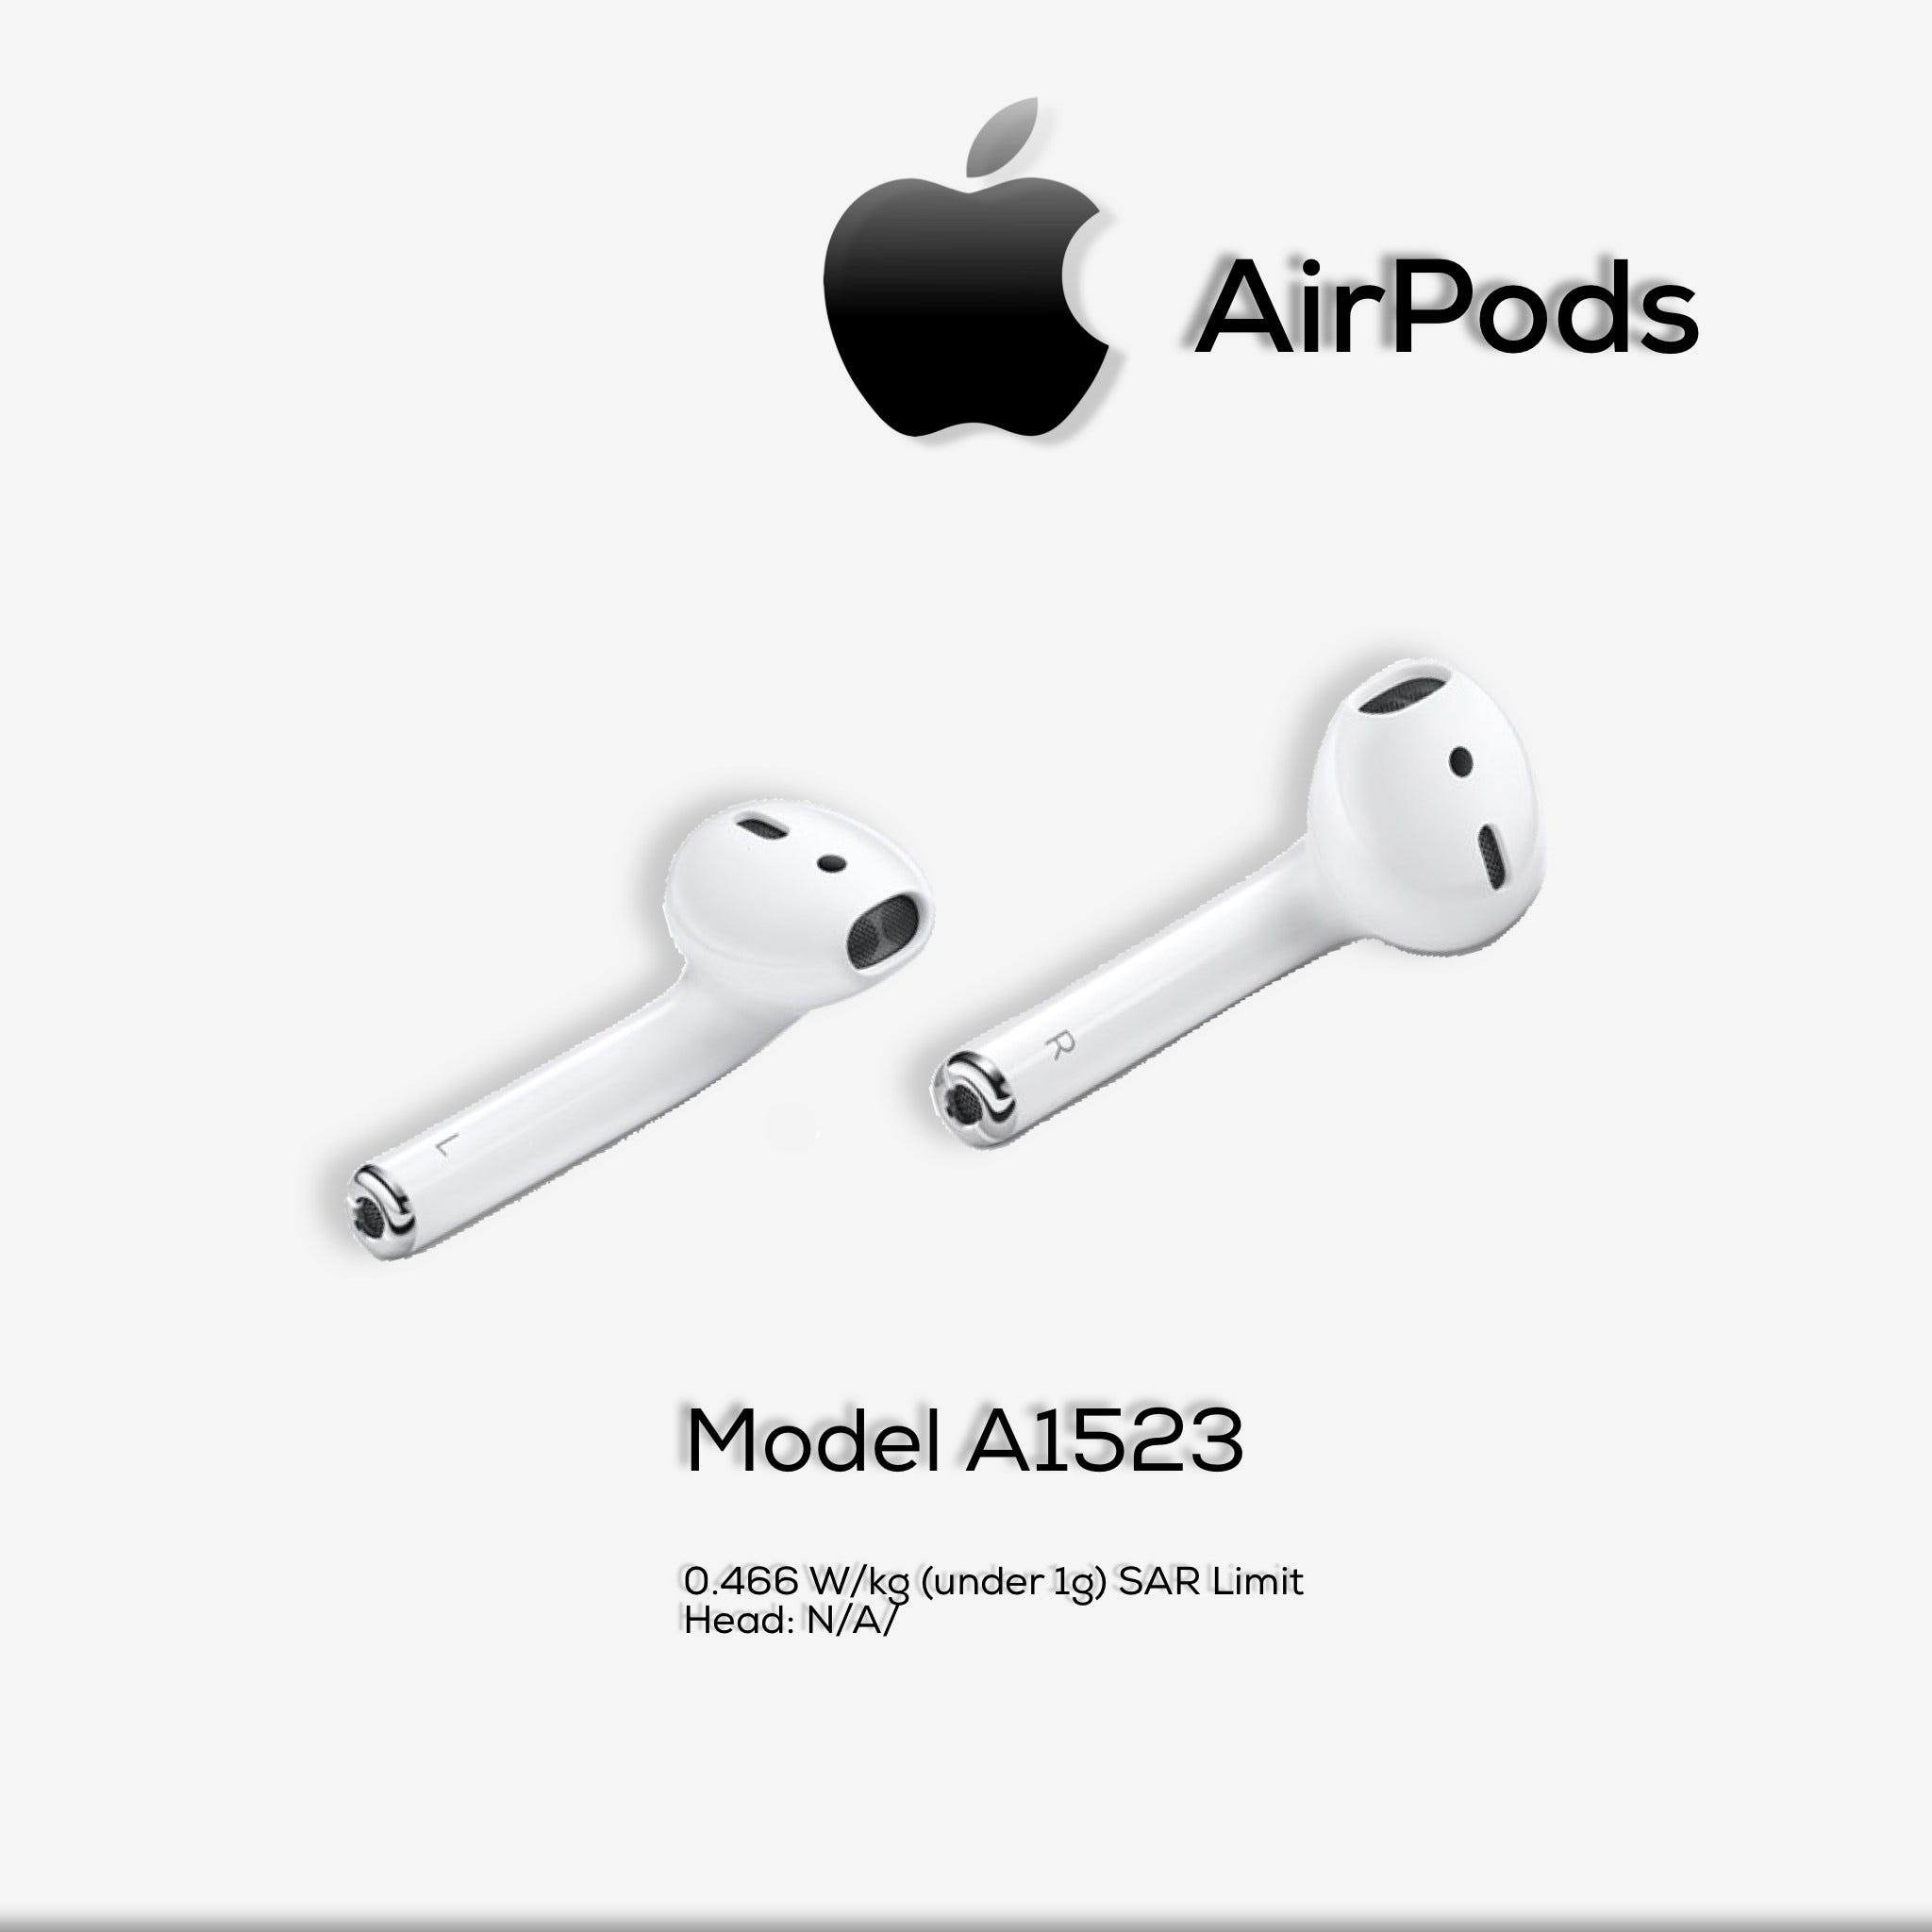 Apple Wireless AirPods Safe? They're Not Bad, But… | by Jordan Cowdery | JACMOVE | Medium